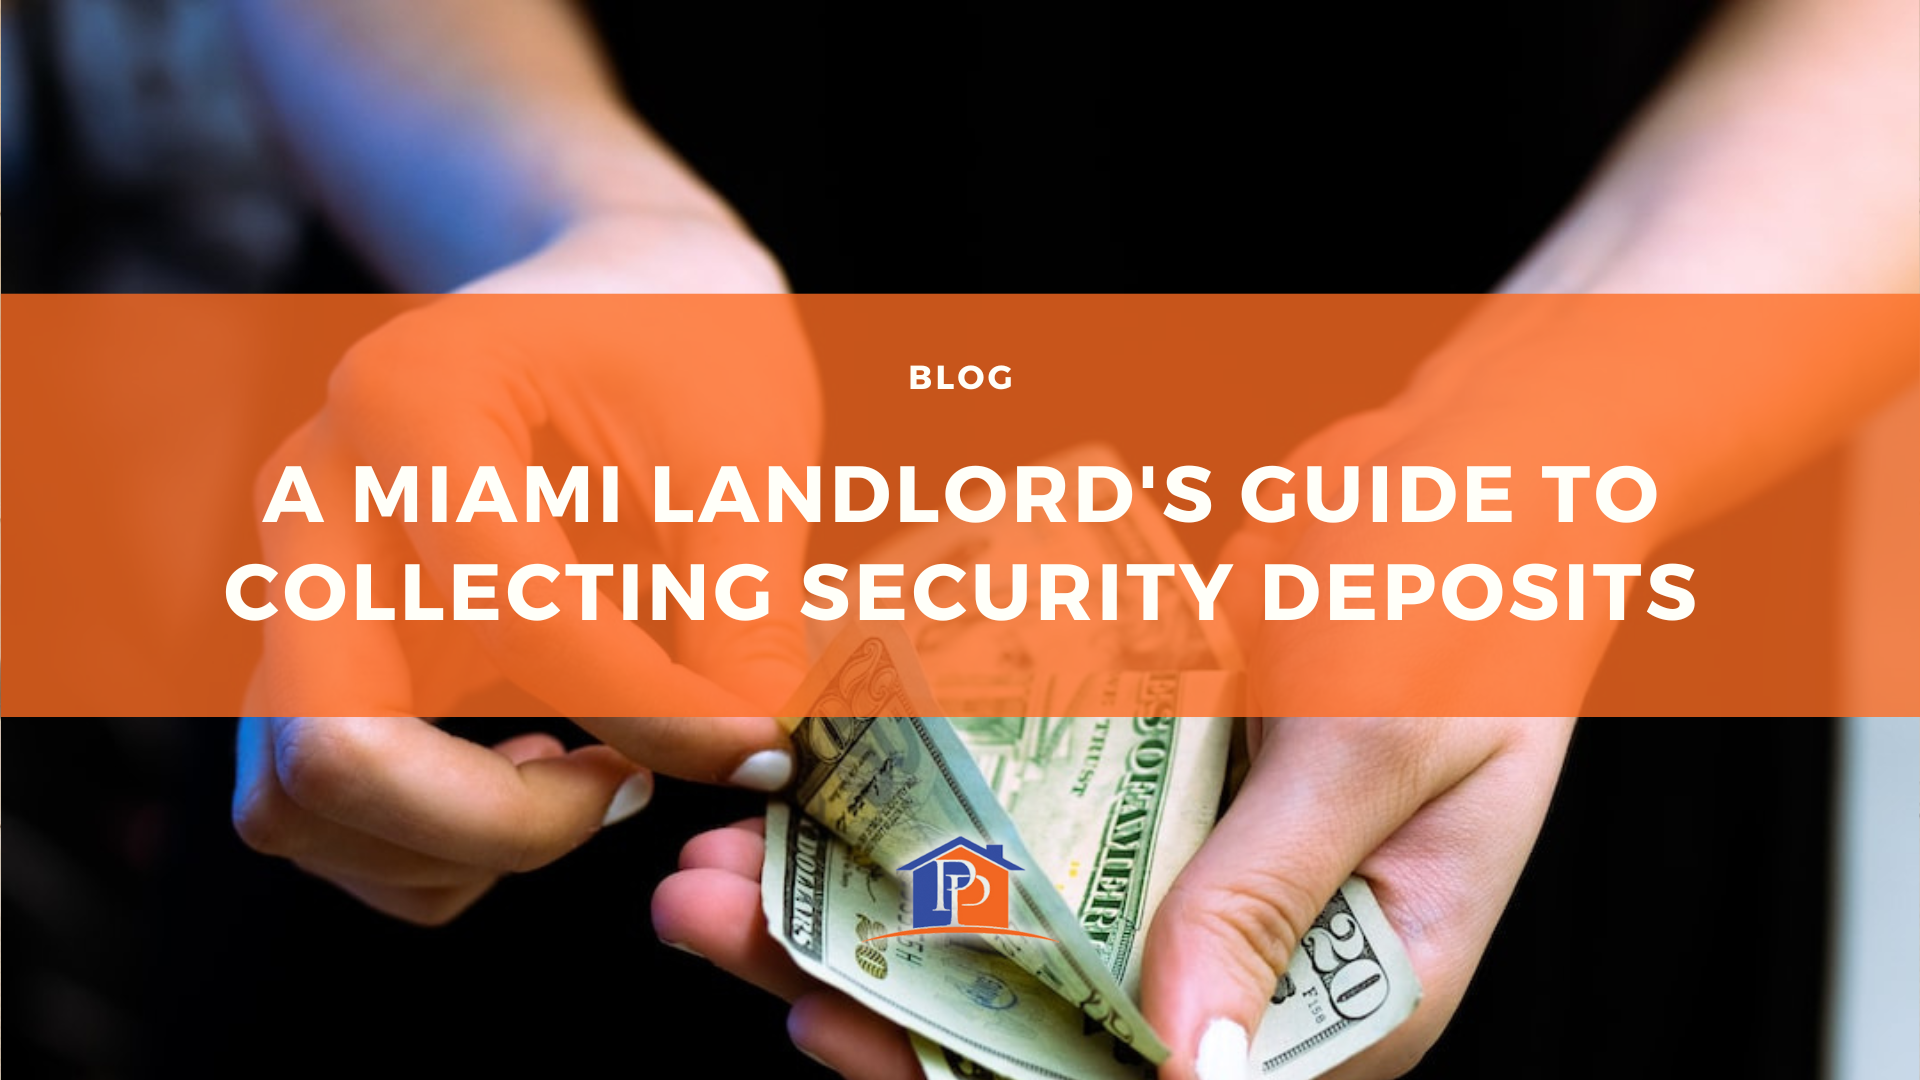 A Miami Landlord's Guide to Collecting Security Deposits